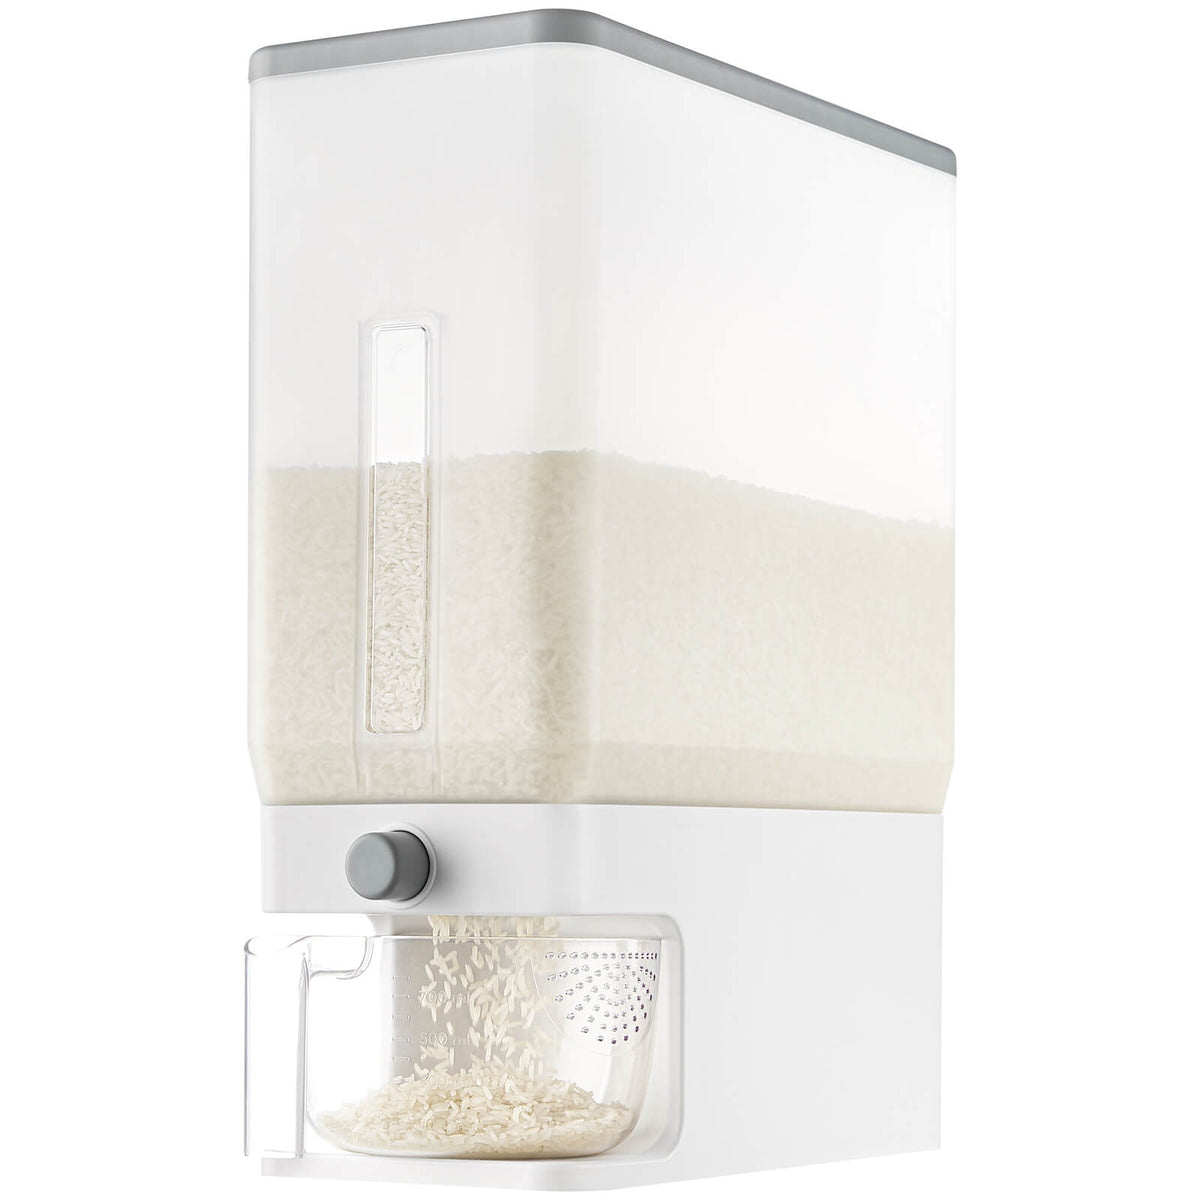 25.4 Lbs Rice Dispenser Container - Lifewit – Lifewitstore